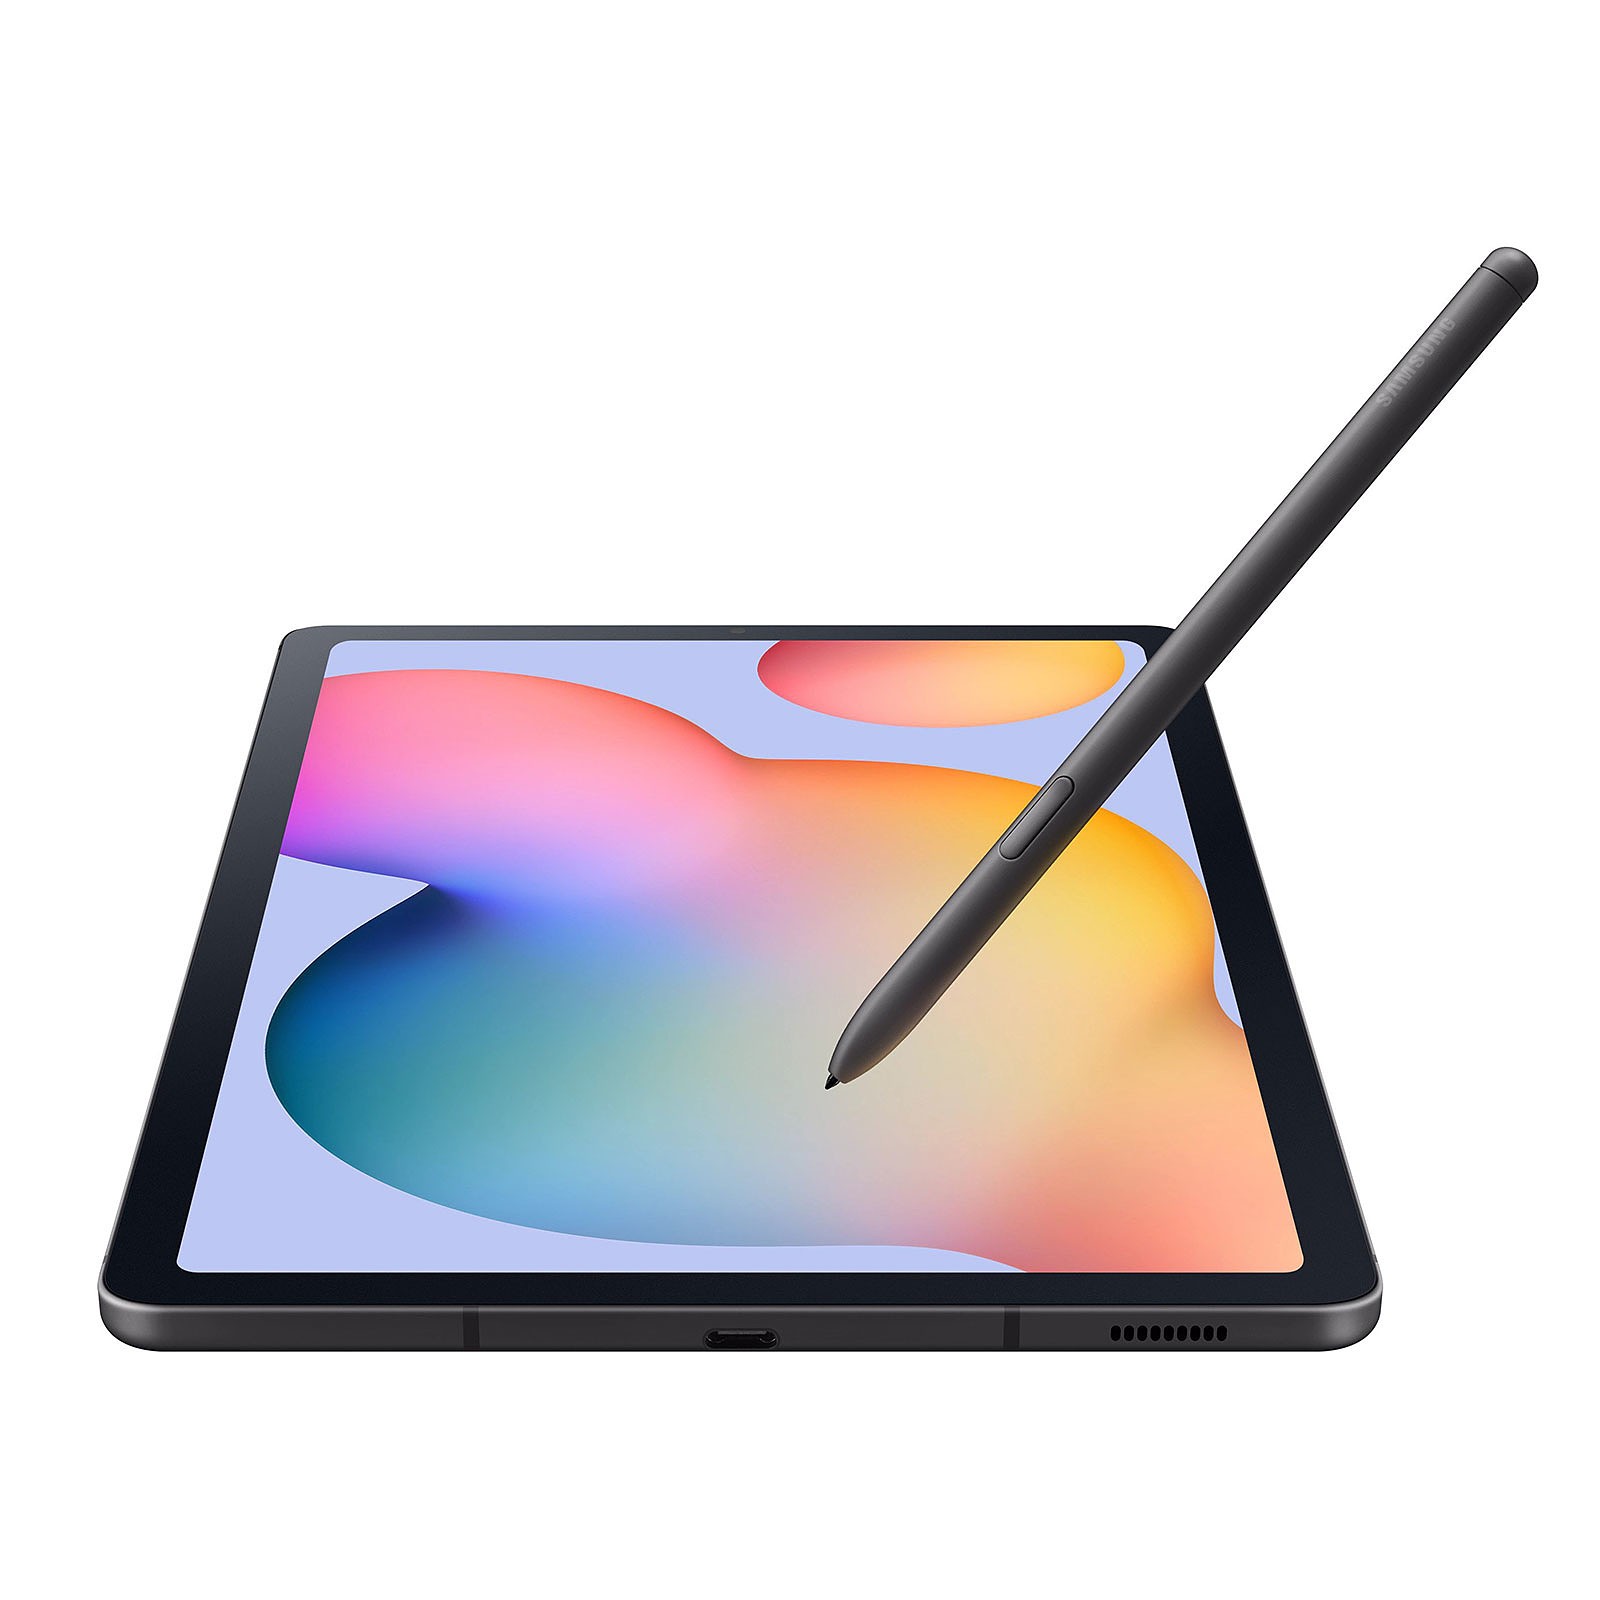 SAMSUNG Tablette tactile Galaxy Tab S6 Lite WiFi 64Go Argent - SM-P610NZAAXEF